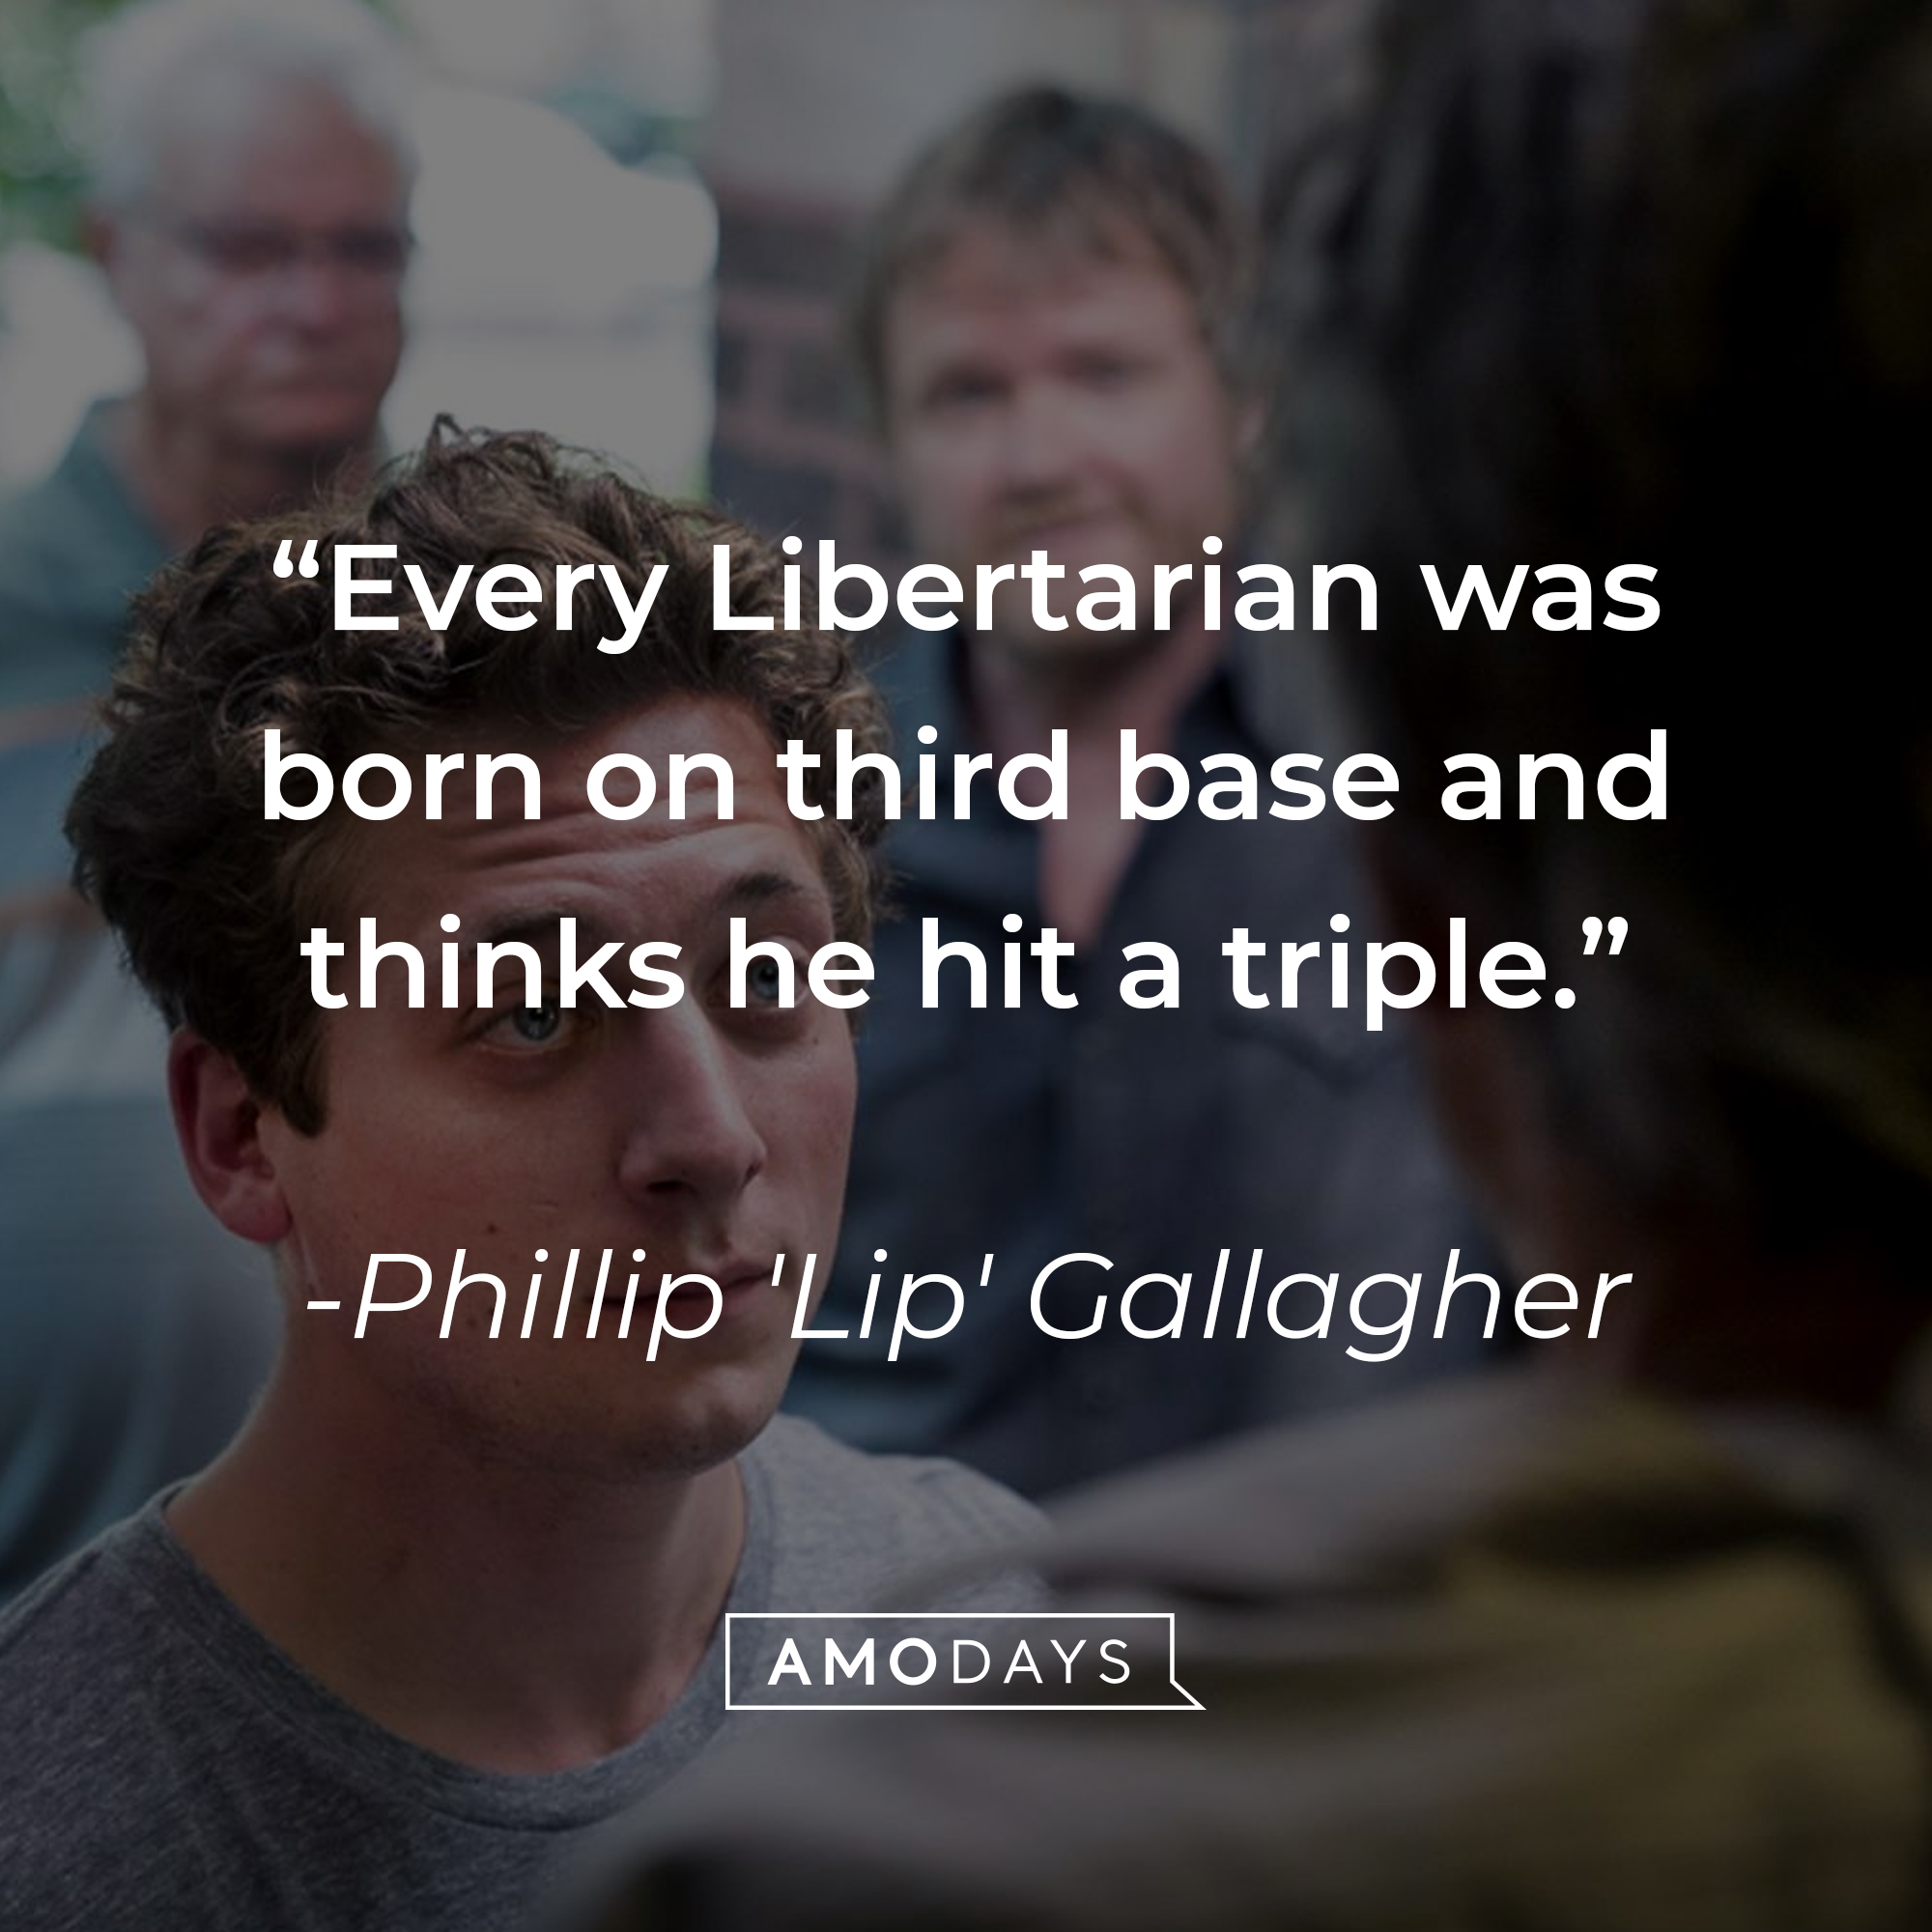 Phillip 'Lip' Gallagher with his quote: “Every Libertarian was born on third base and thinks he hit a triple.” | Source: facebook.com/ShamelessOnShowtime